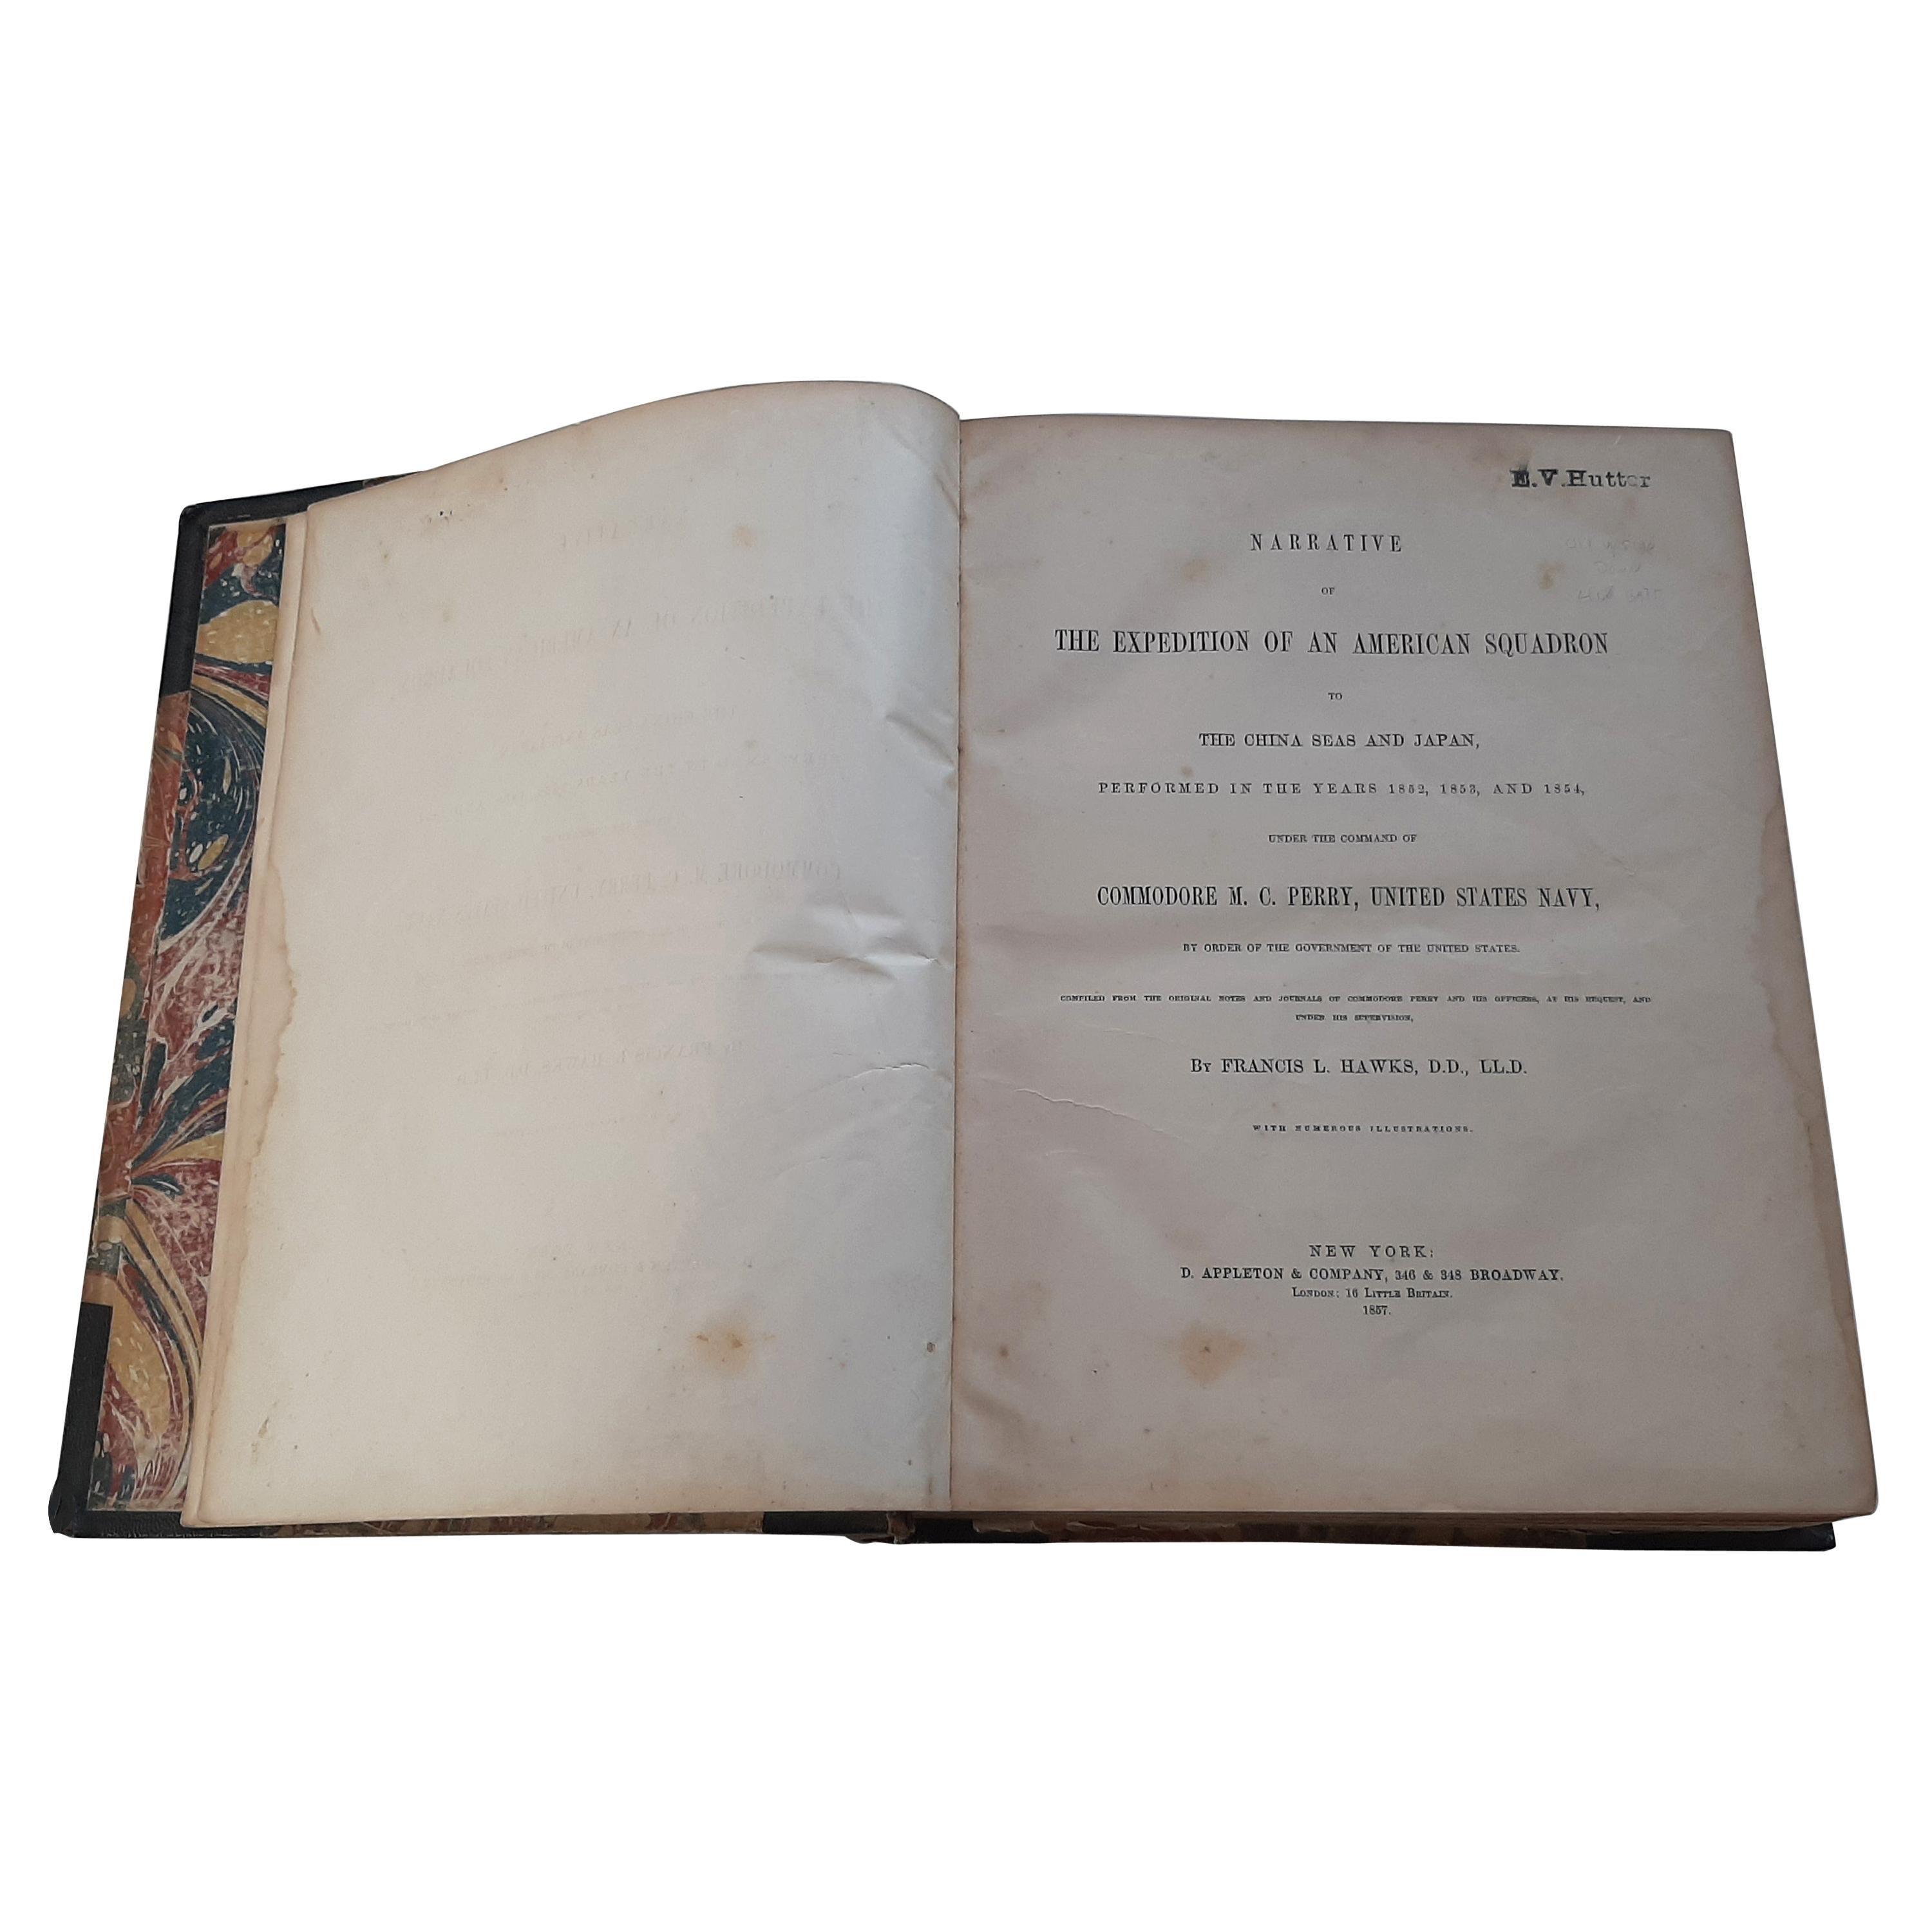 Narrative of the Expedition of an American Squadron by M.C. Perry, '1857' For Sale